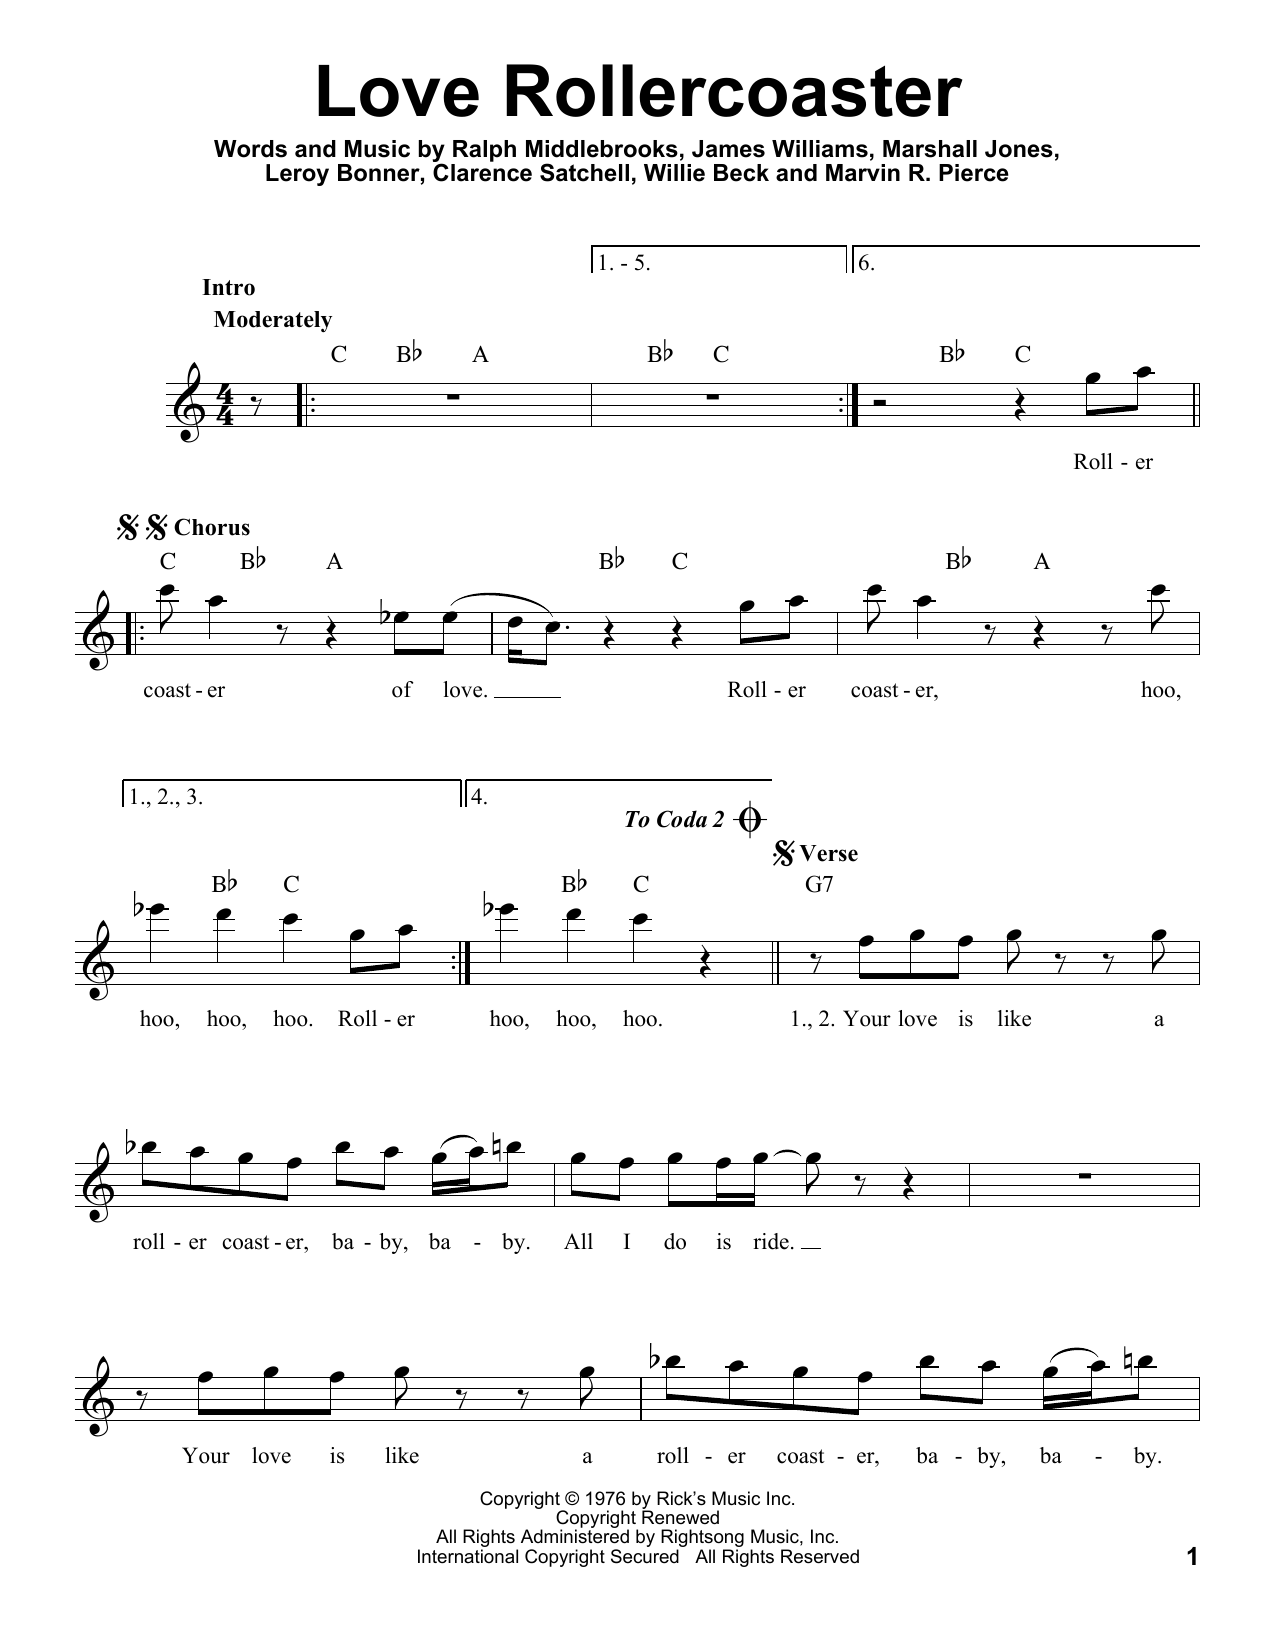 Download Ohio Players Love Rollercoaster Sheet Music